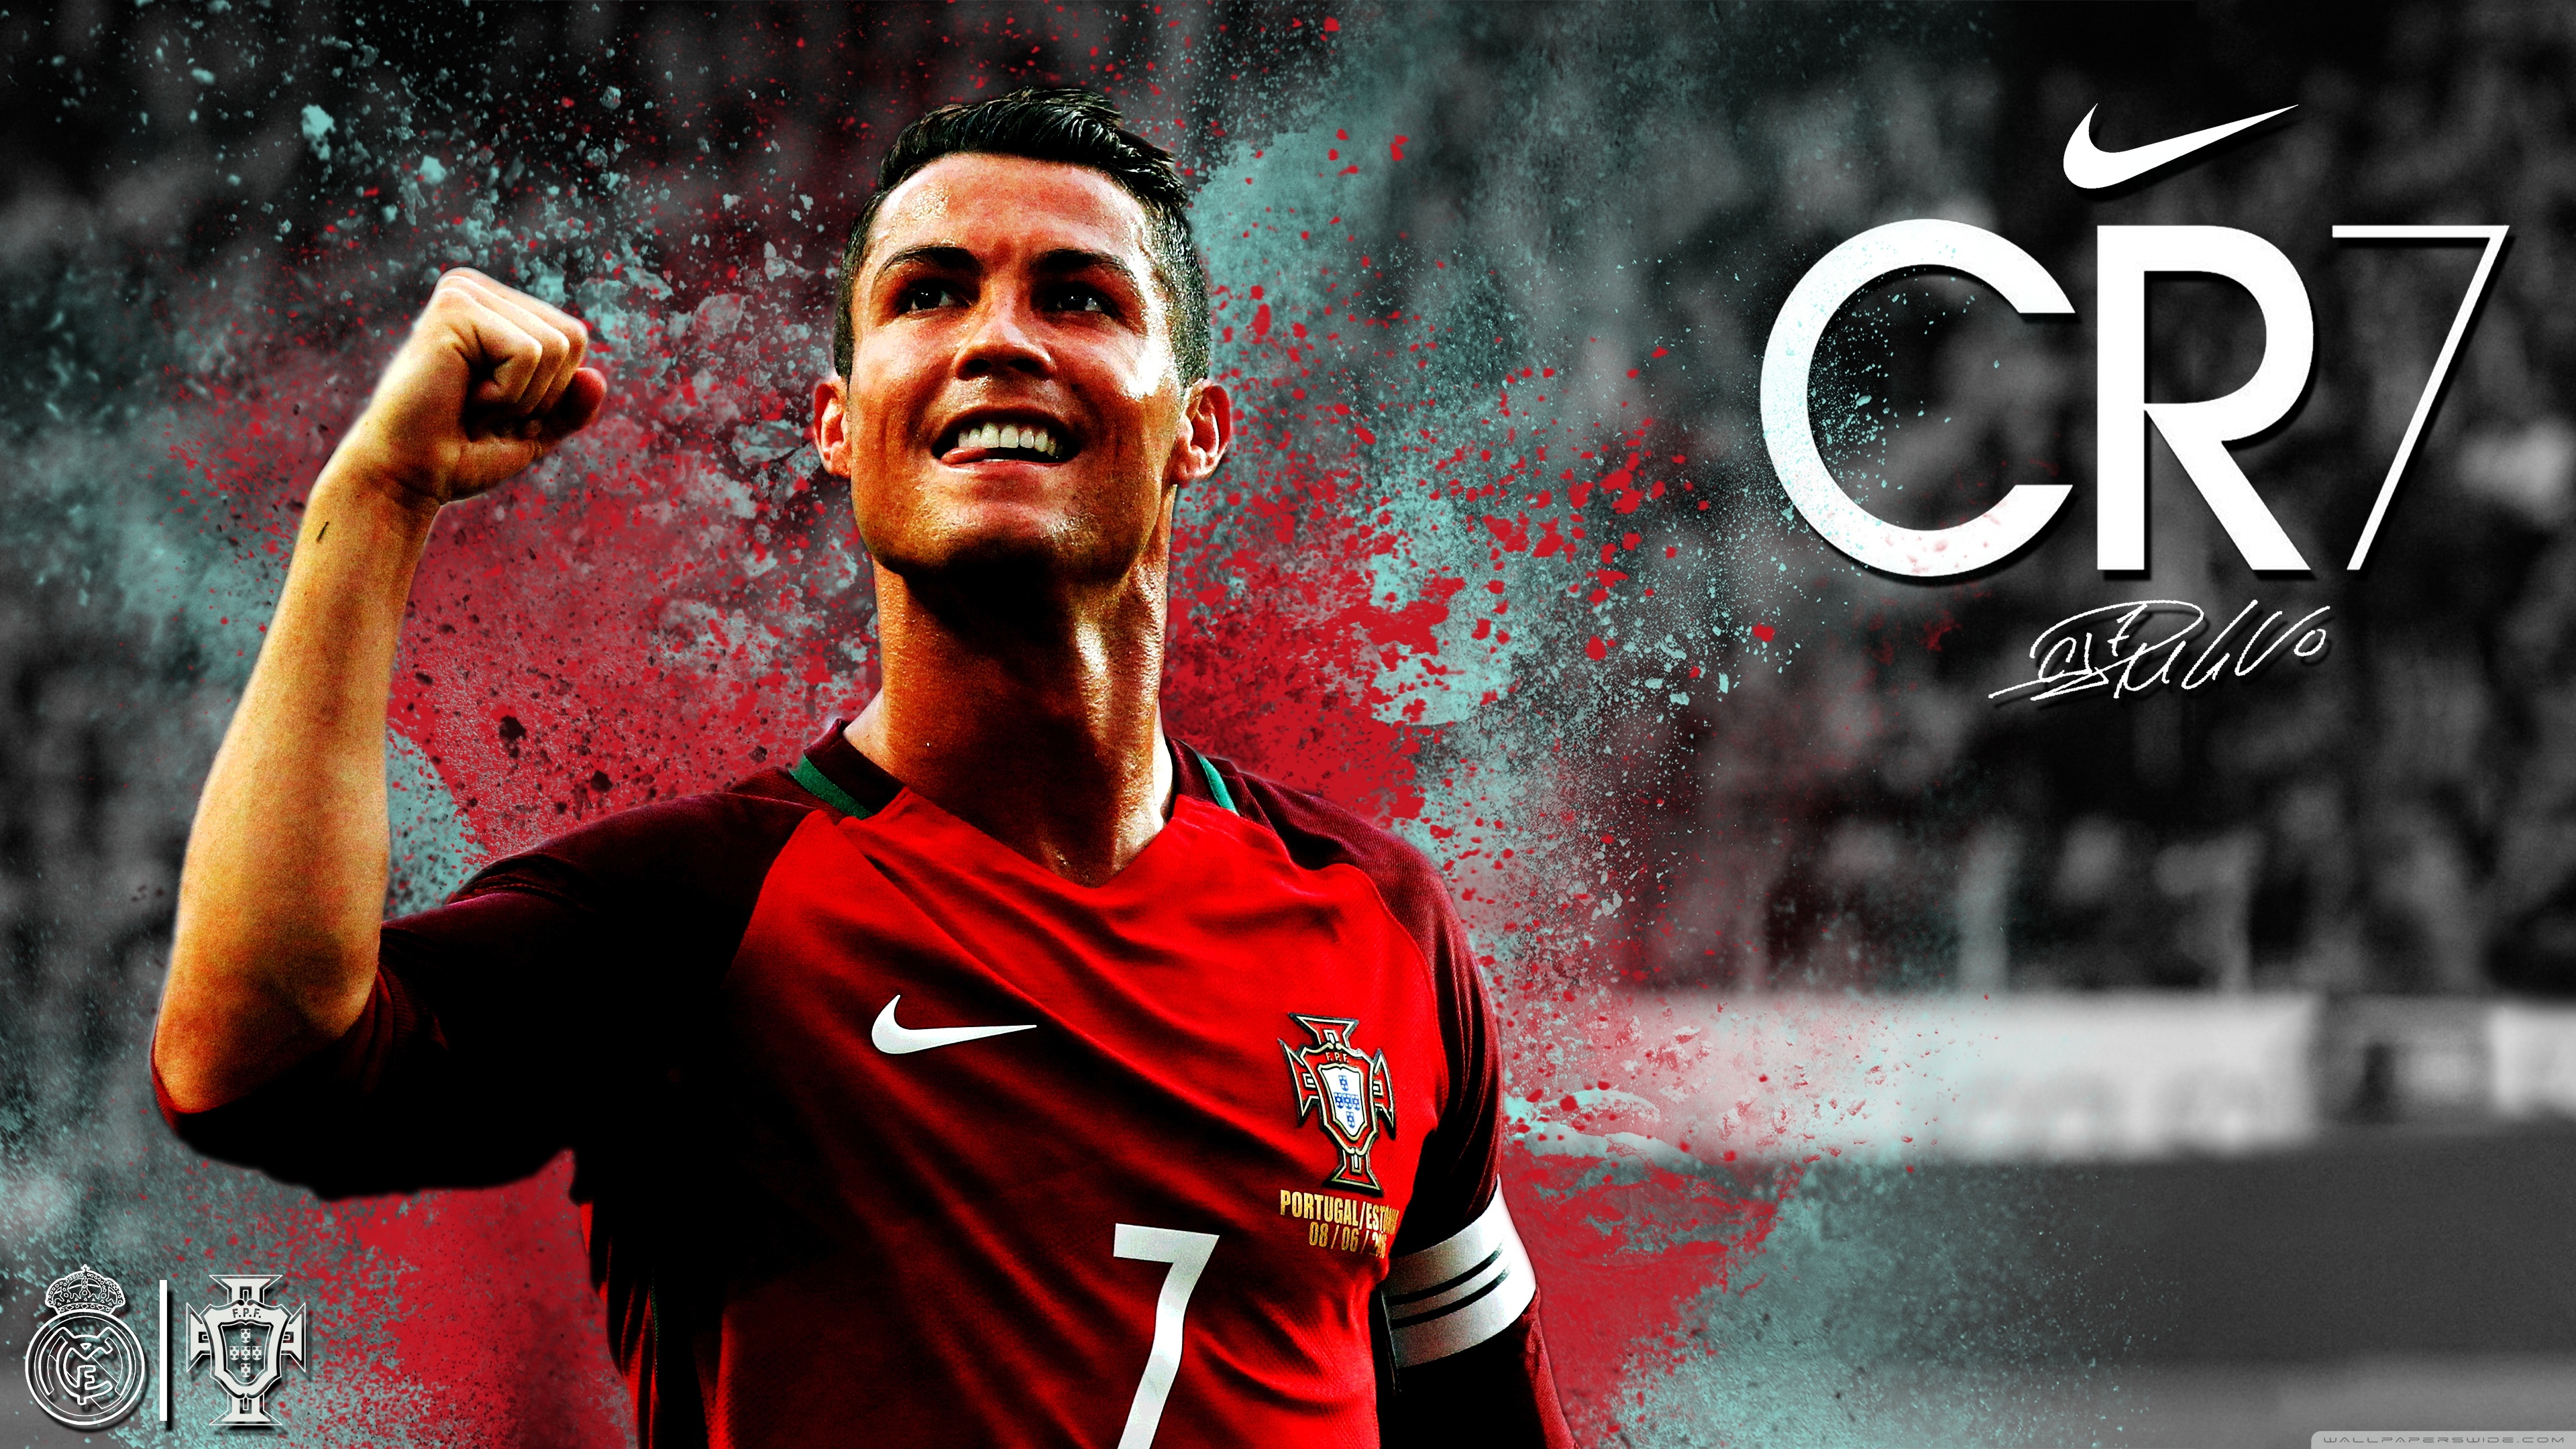 Detail Cr7 Hd Wallpapers Nomer 25